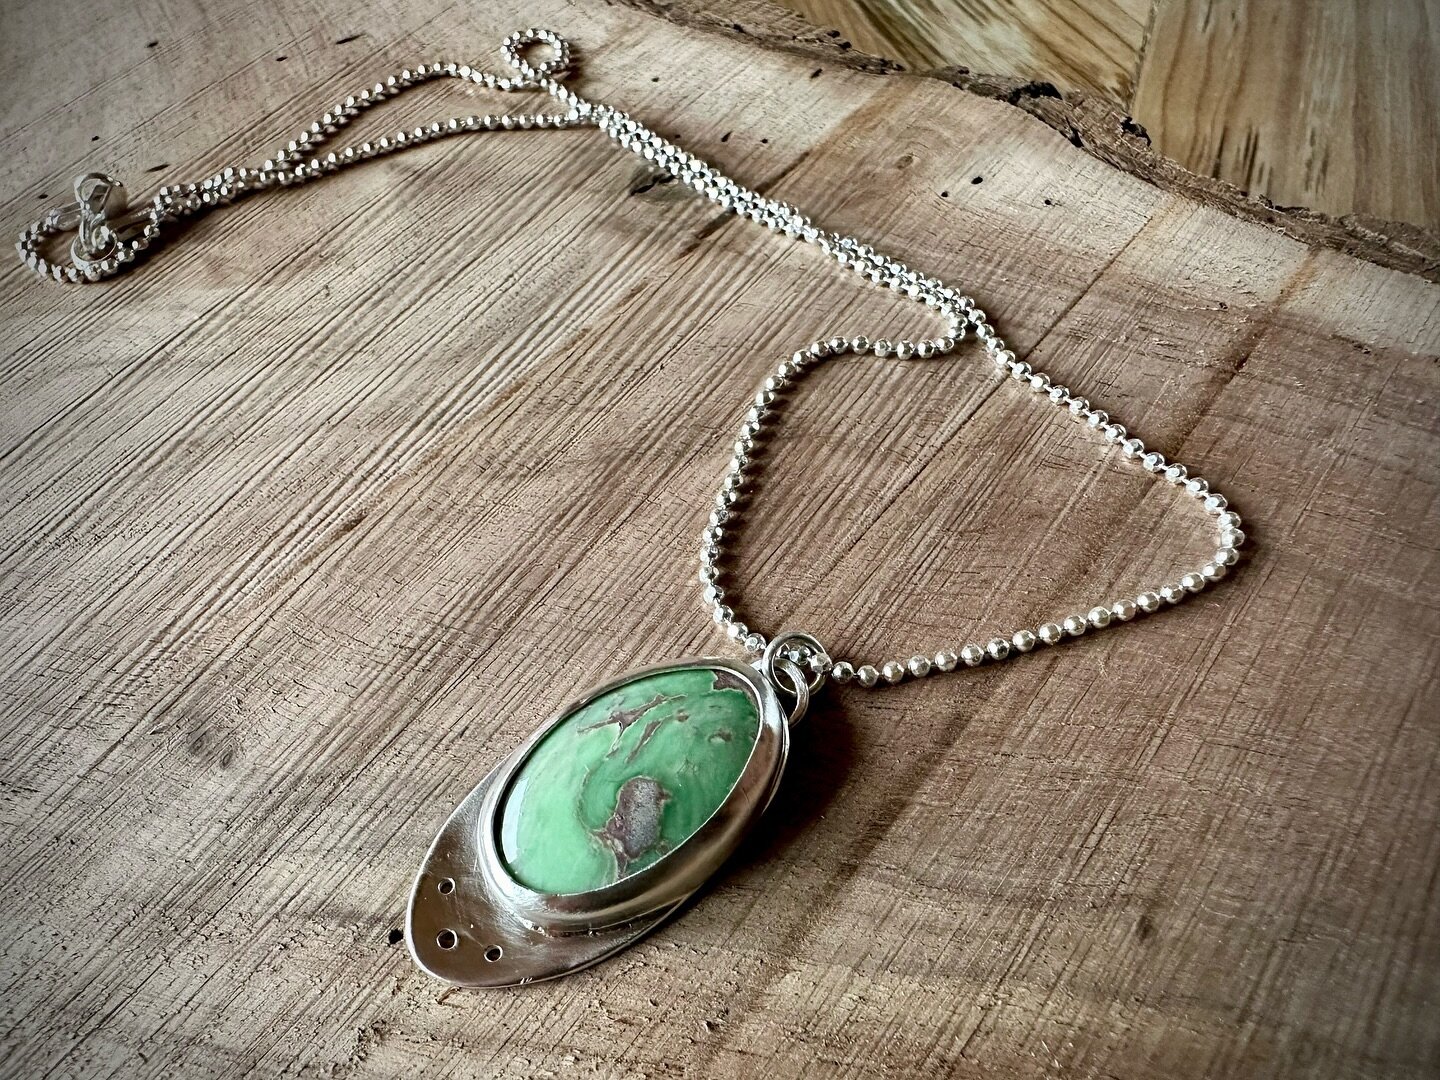 Gorgeous green turquoise custom pendant 🤩 off to be a fun 🎁